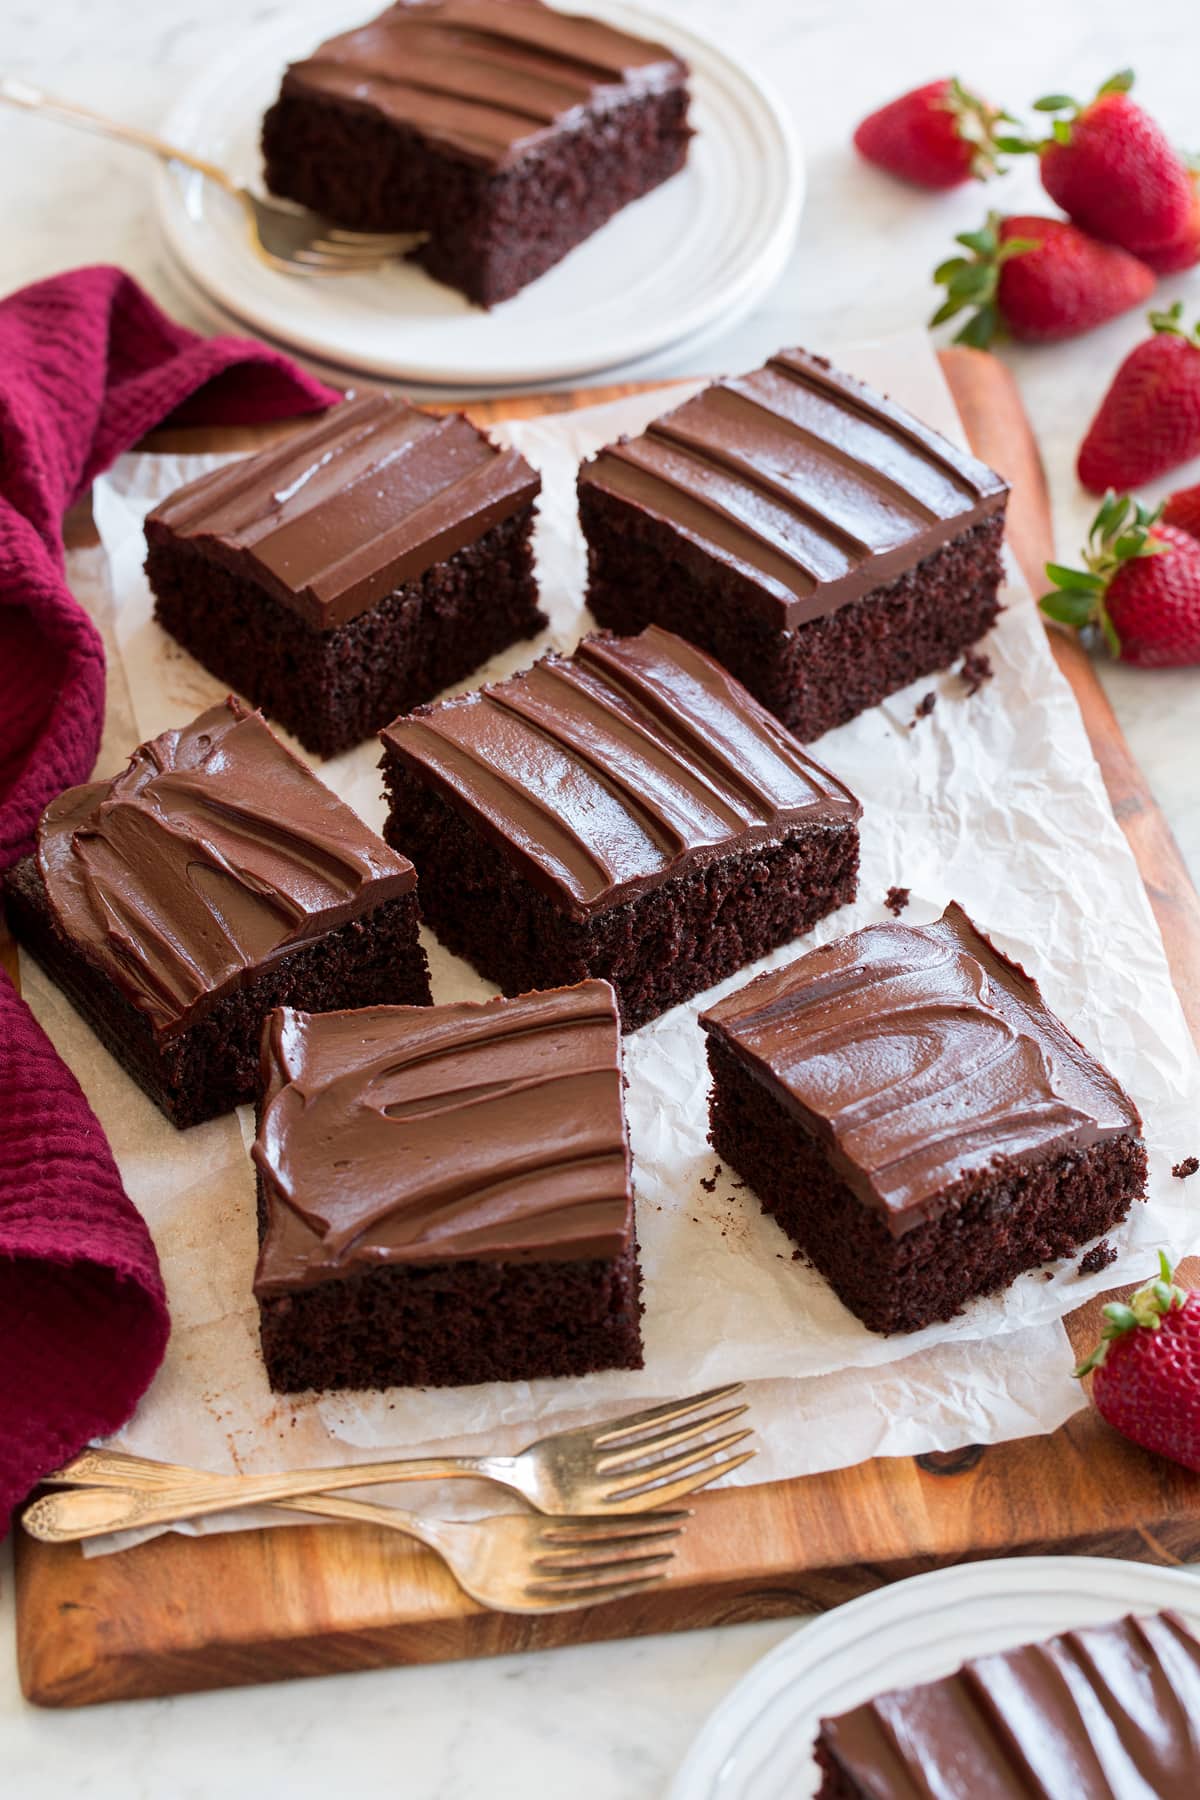 Square slices of homemade chocolate cake shown on a wooden serving board with parchment paper. Strawberries are shown as a serving suggestion to the side.